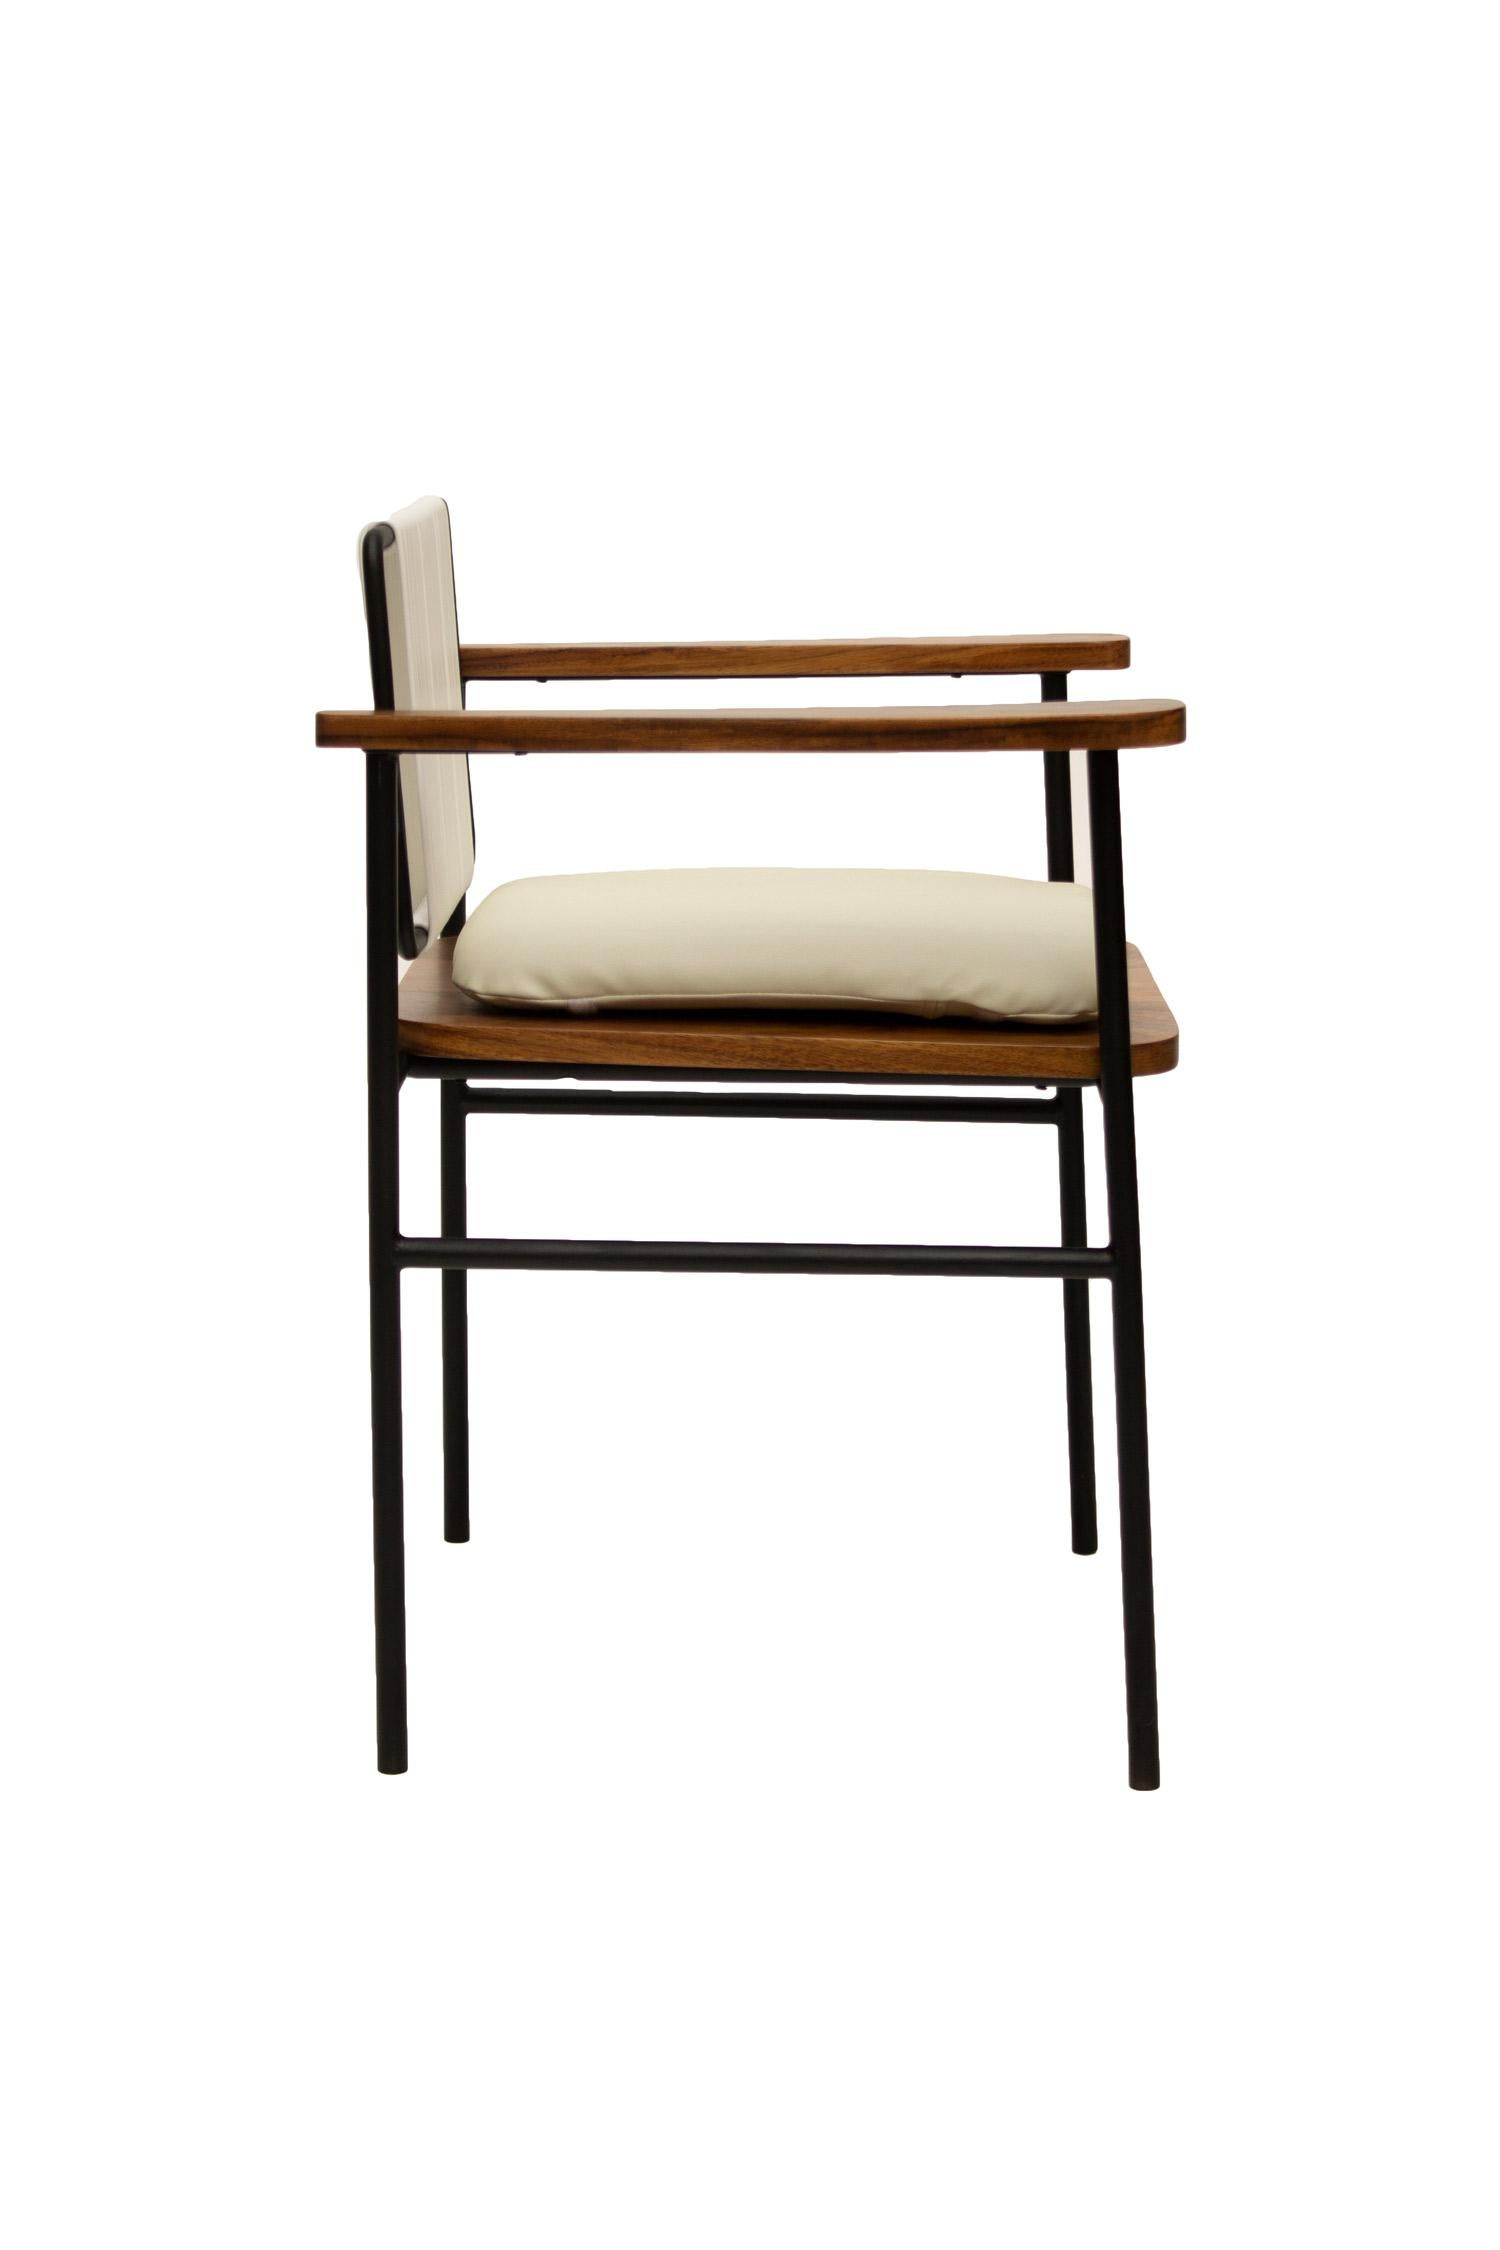 Hand-Crafted Handcrafted Mid-Century Mita Armchair, Tropical Parota Wood & Outdoor Pad For Sale